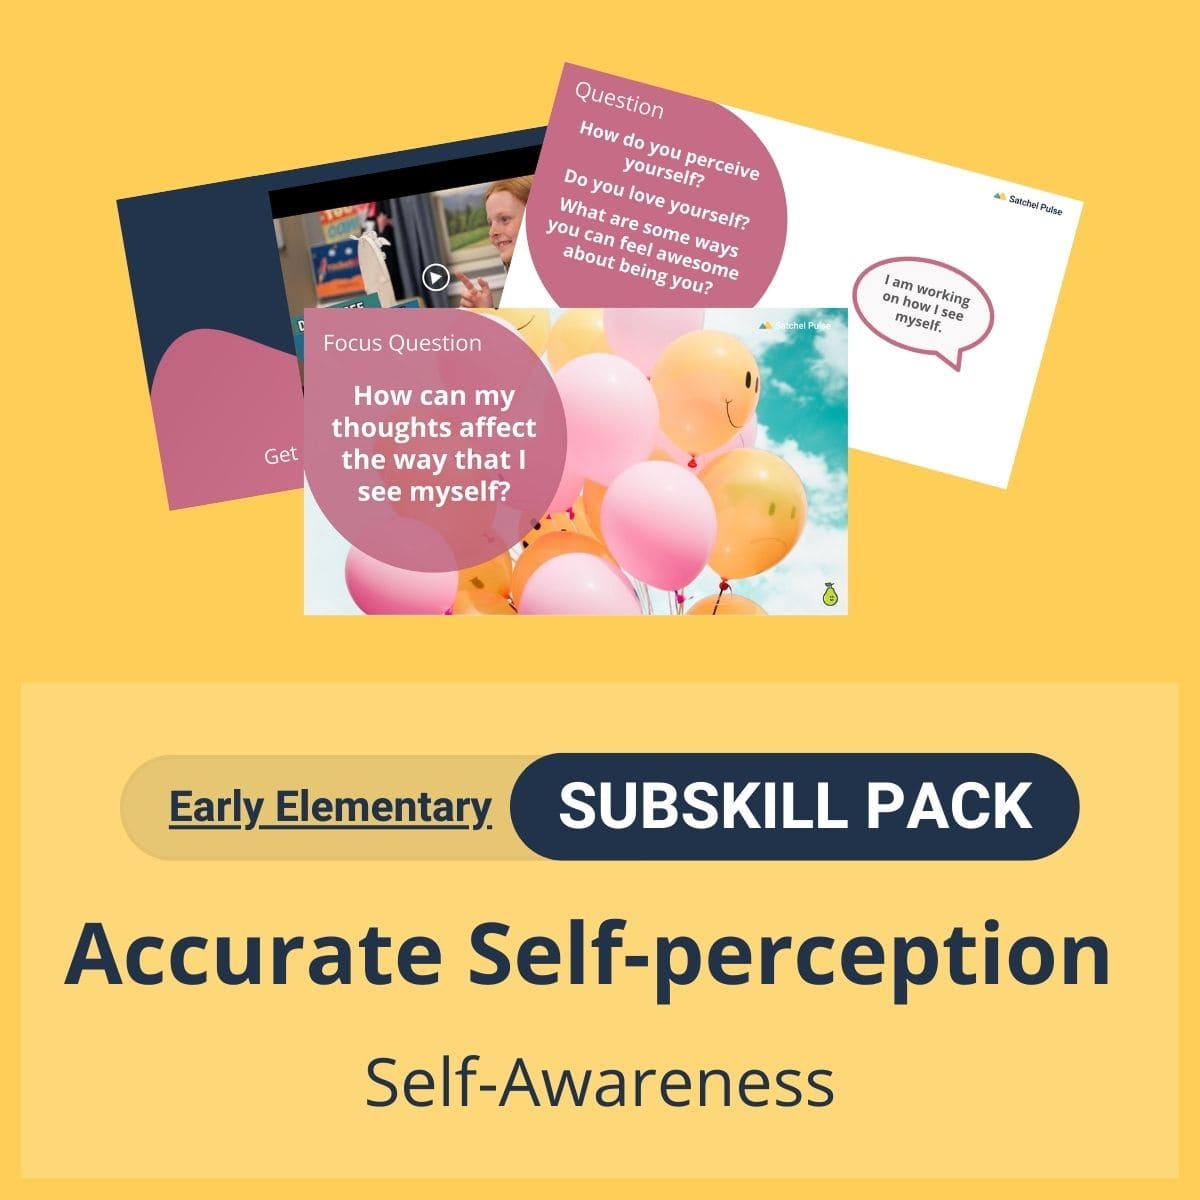 SEL Resource pack with social-emotional learning lessons and self-studies to help you teach Accurate Self-perception in your classroom as a part of the SEL curriculum.